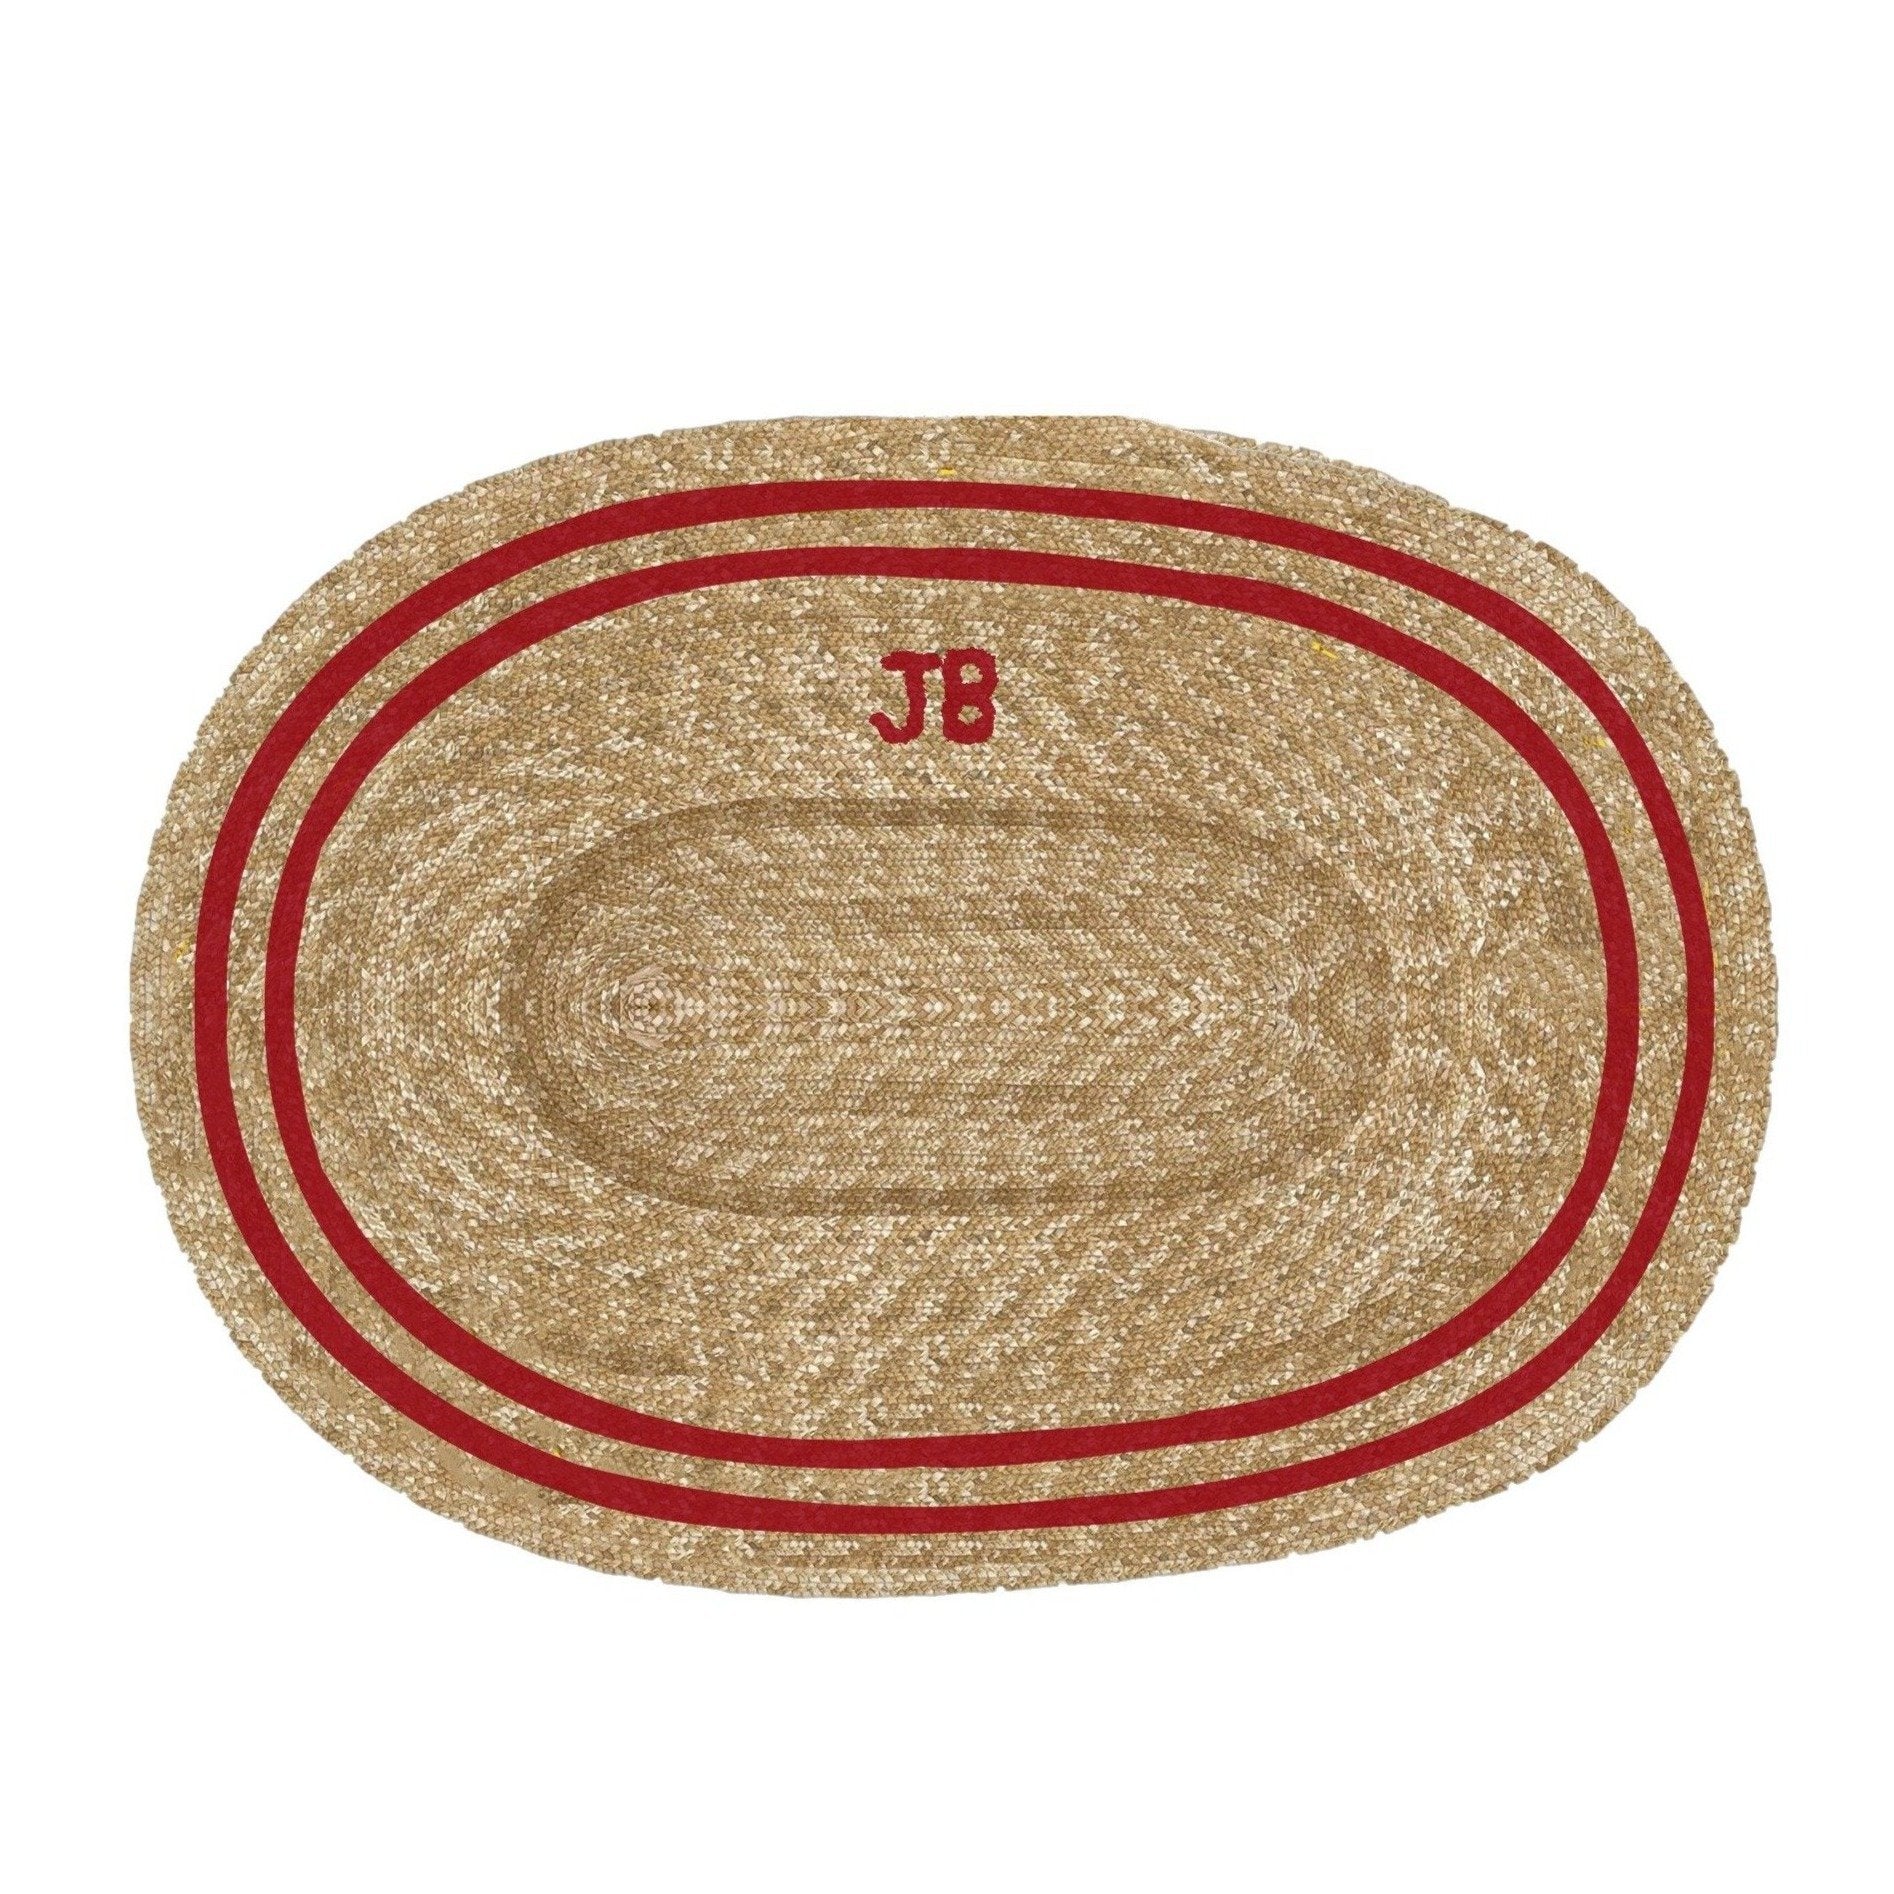 Julia B. Riva Placemat - Red